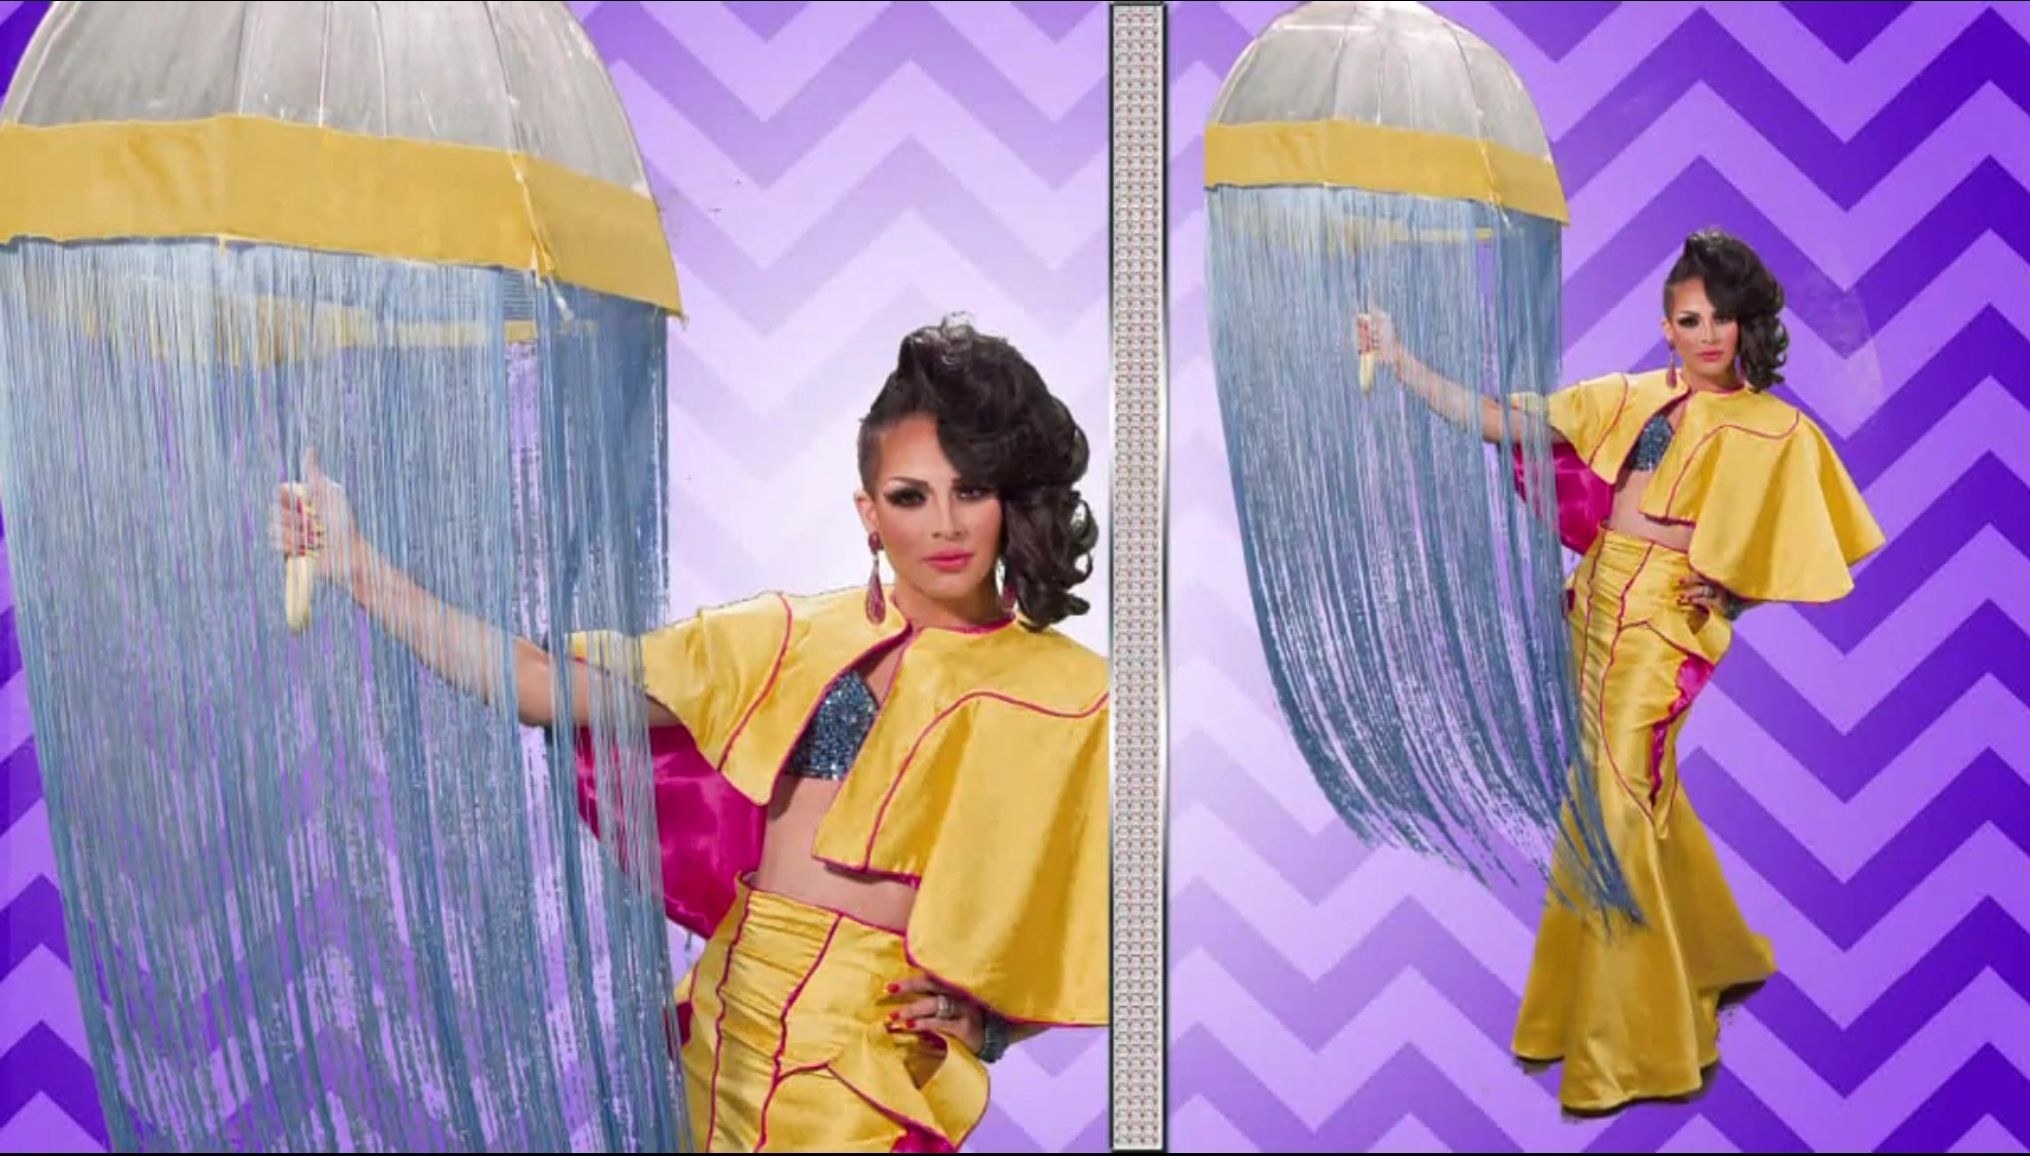 Drag queen April Carrion wearing a yellow bolero and fishtail skirt while holding a matching umbrella with blue fringe hanging from it